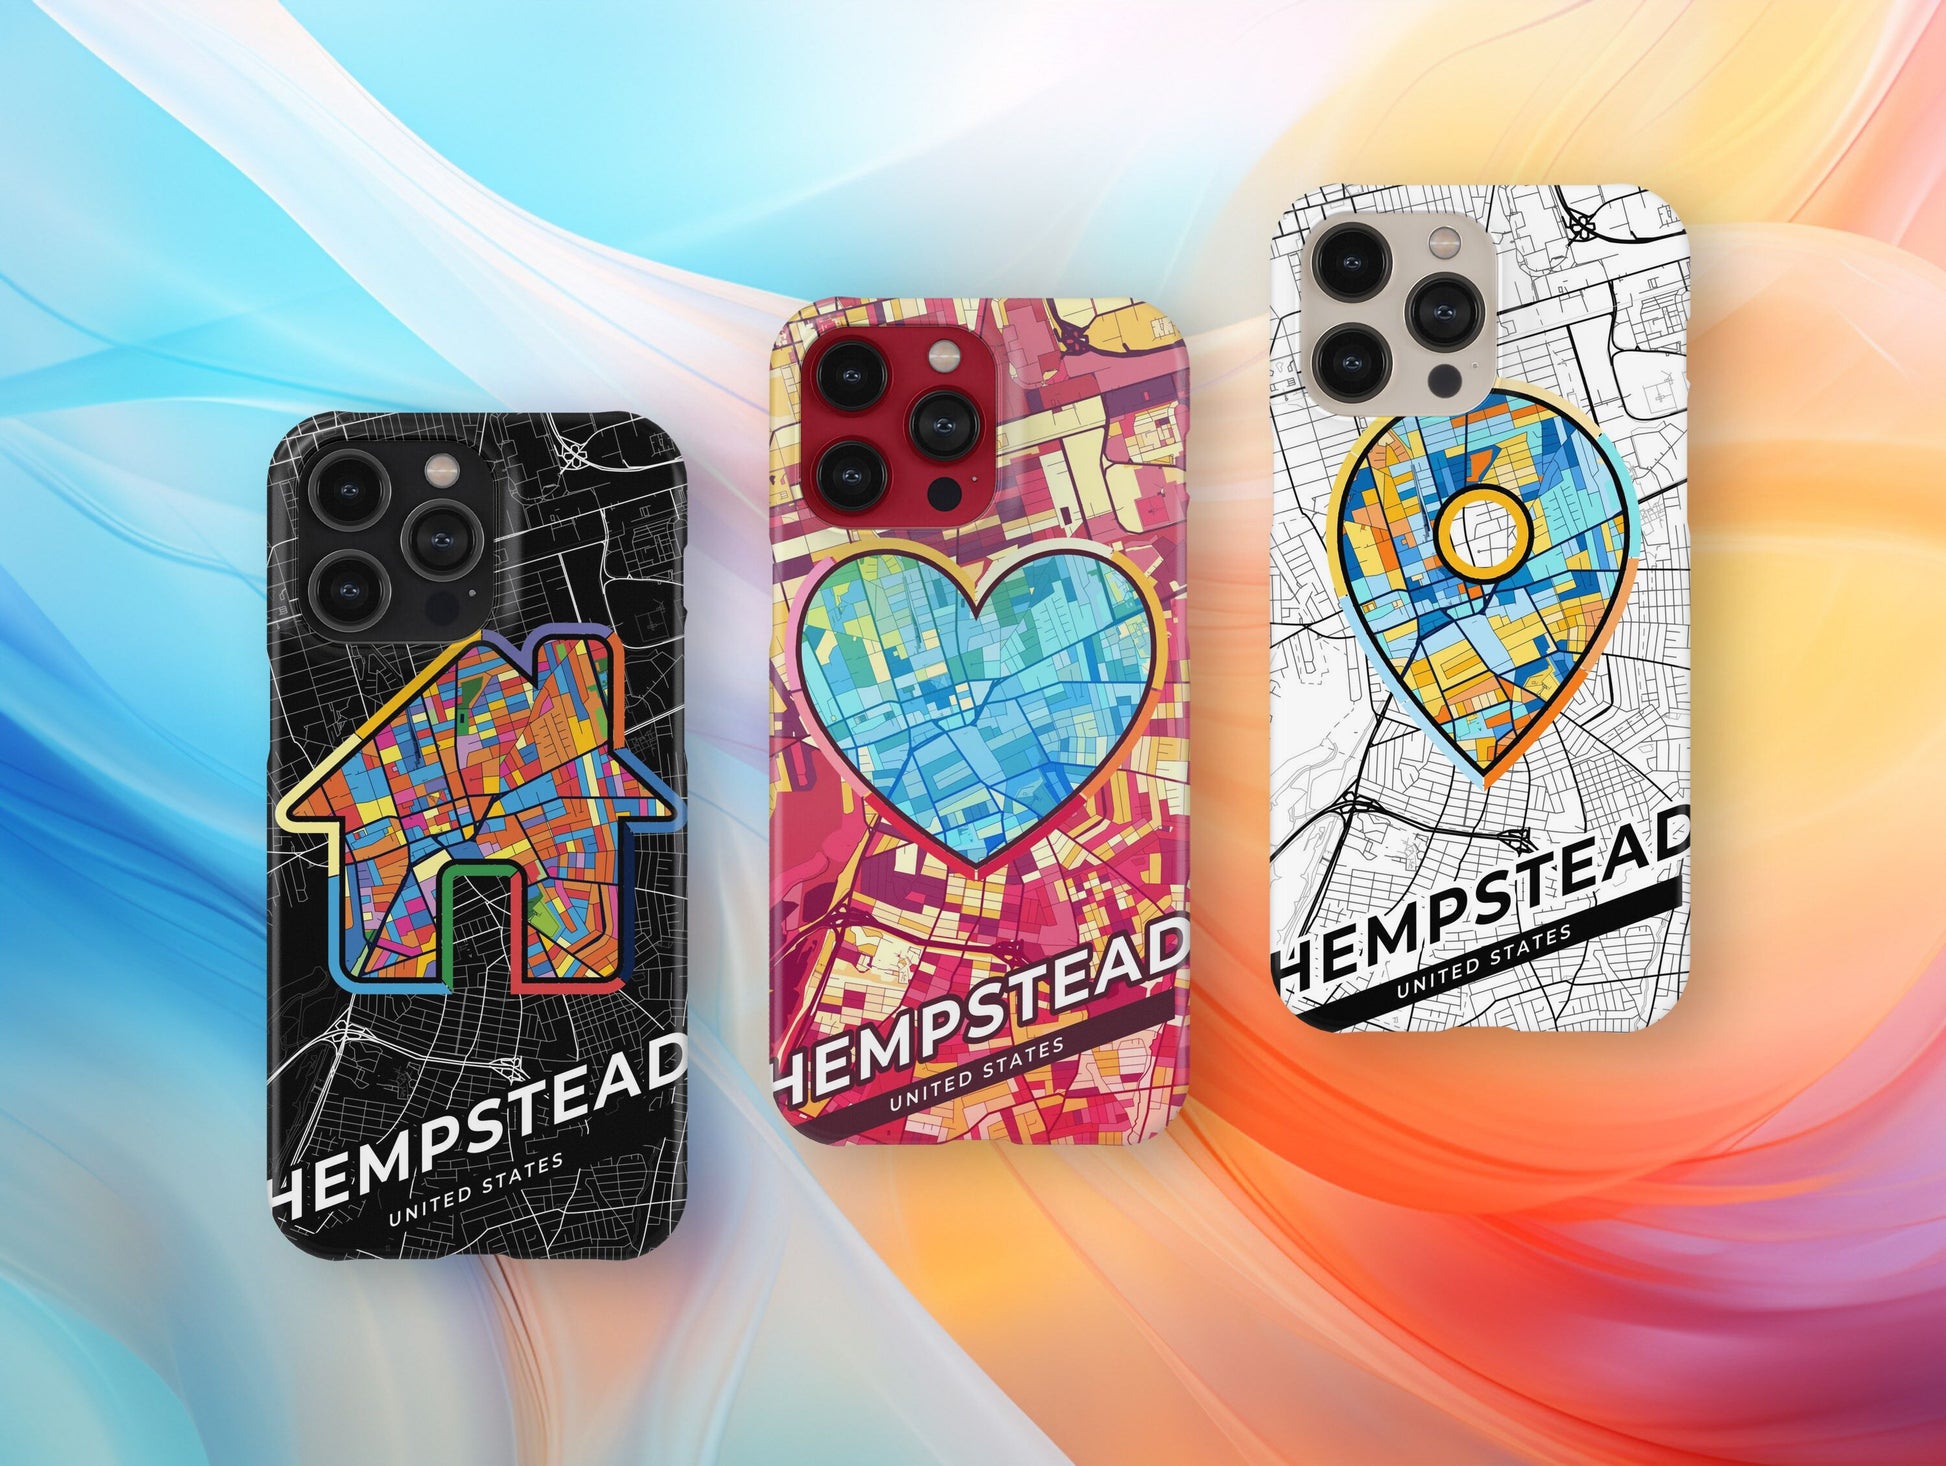 Hempstead New York slim phone case with colorful icon. Birthday, wedding or housewarming gift. Couple match cases.